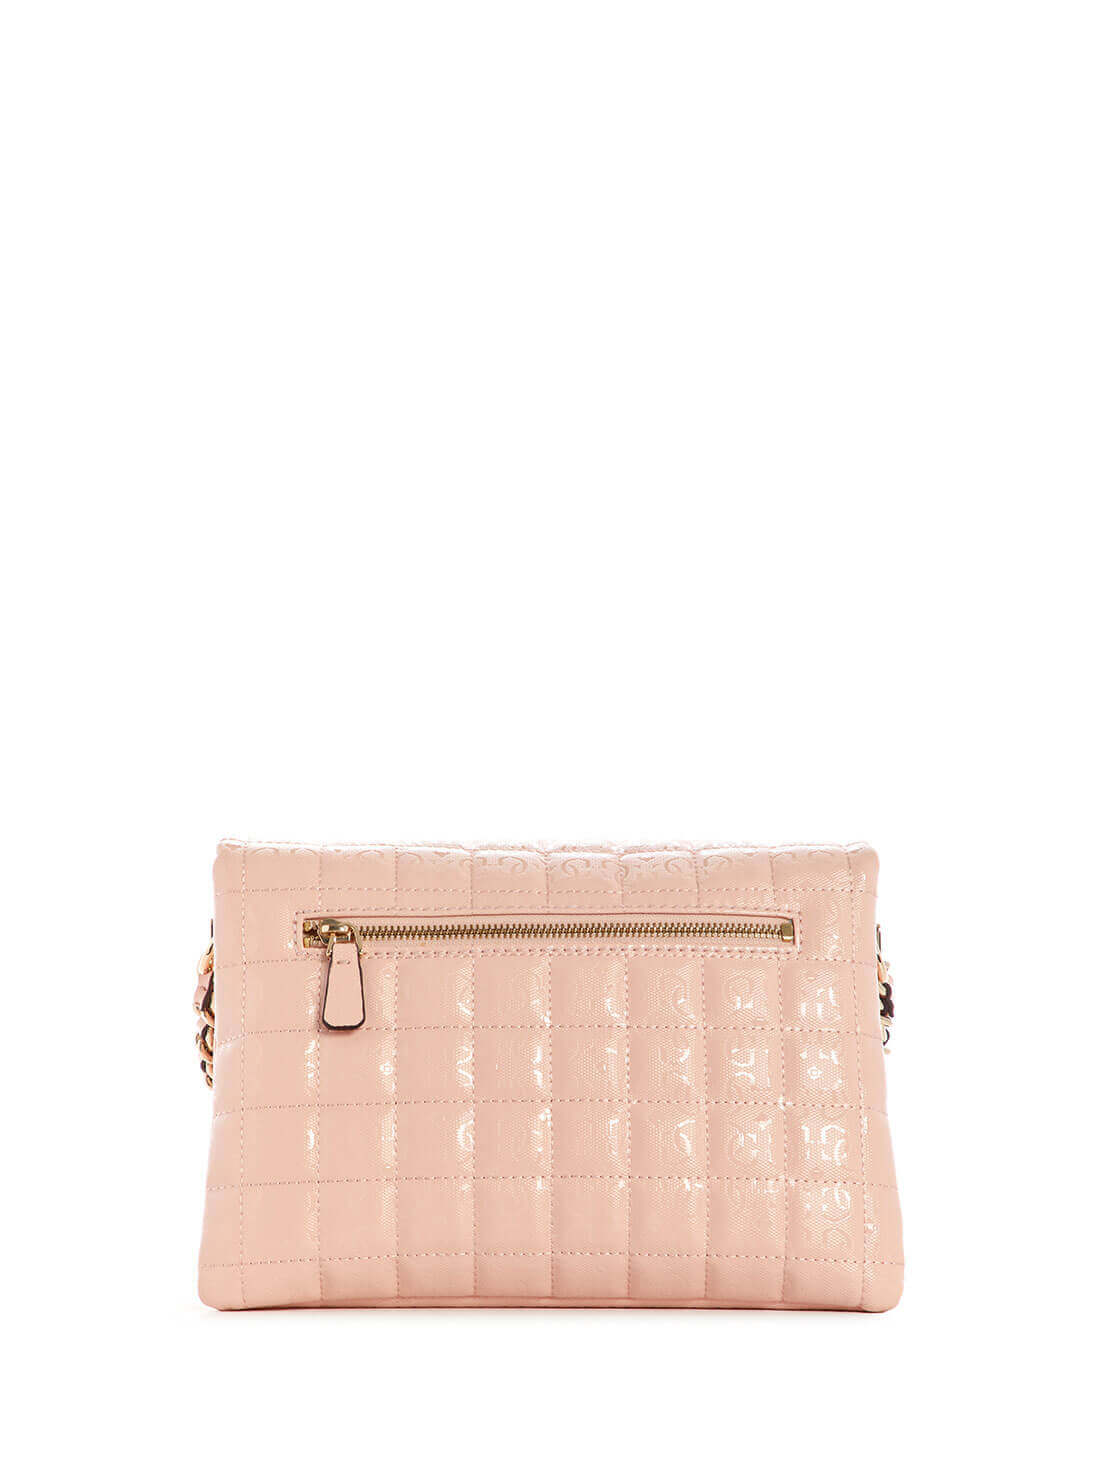 GUESS Womens Blush Pink Quilted Kobo Crossbody Bag GG841121 Back View